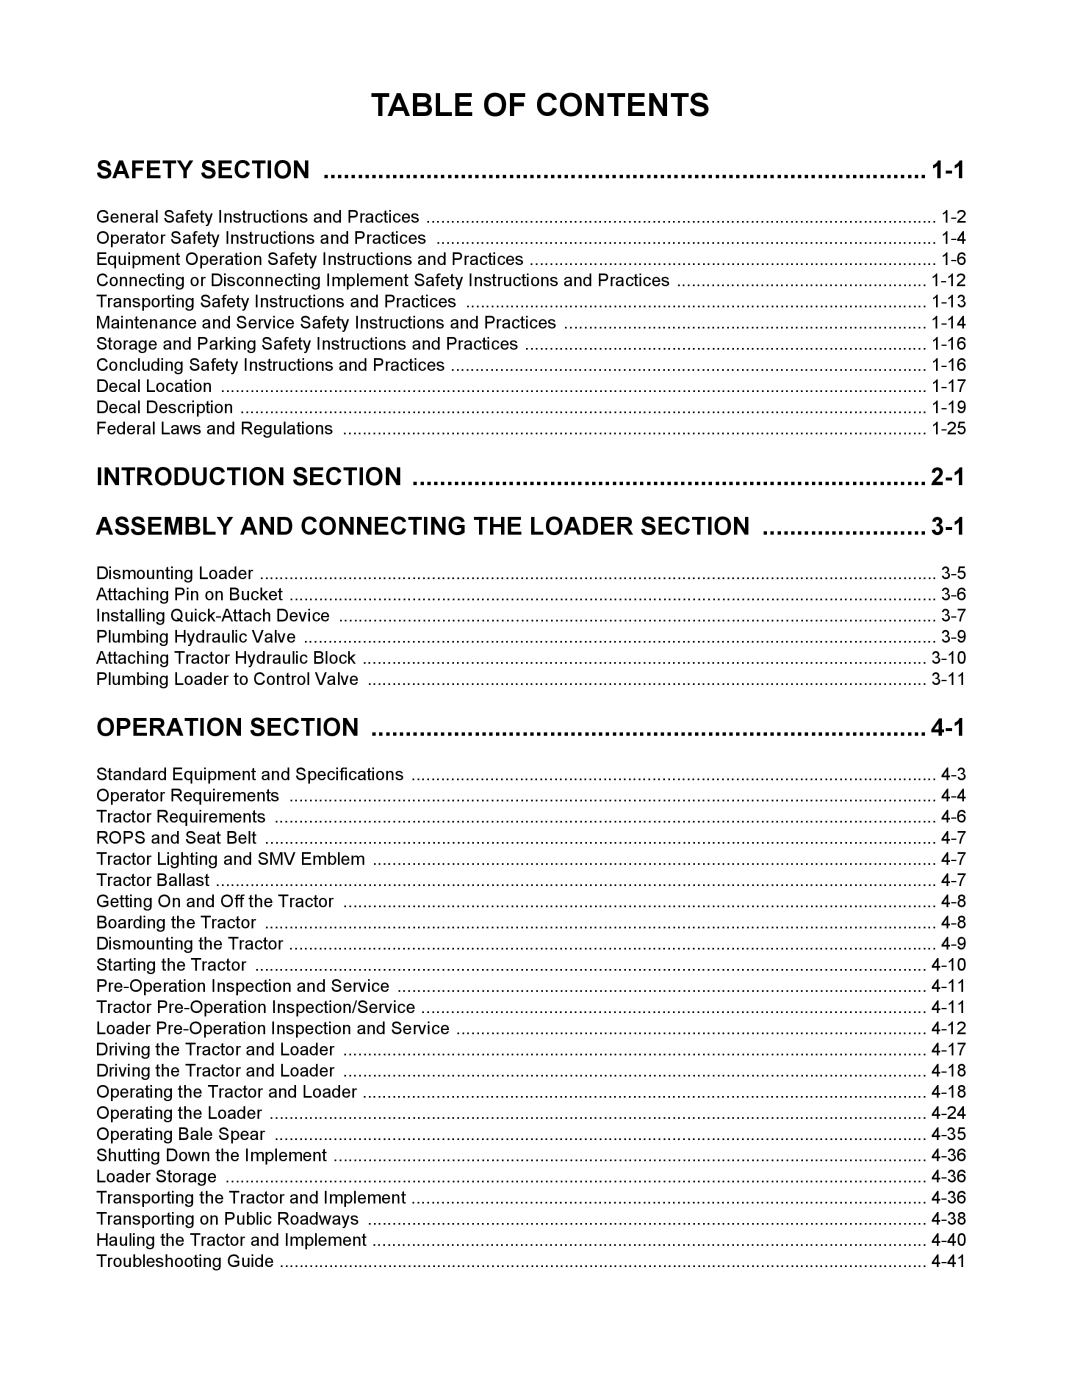 Servis-Rhino 1480, 1485, 1495 manual Table of Contents 